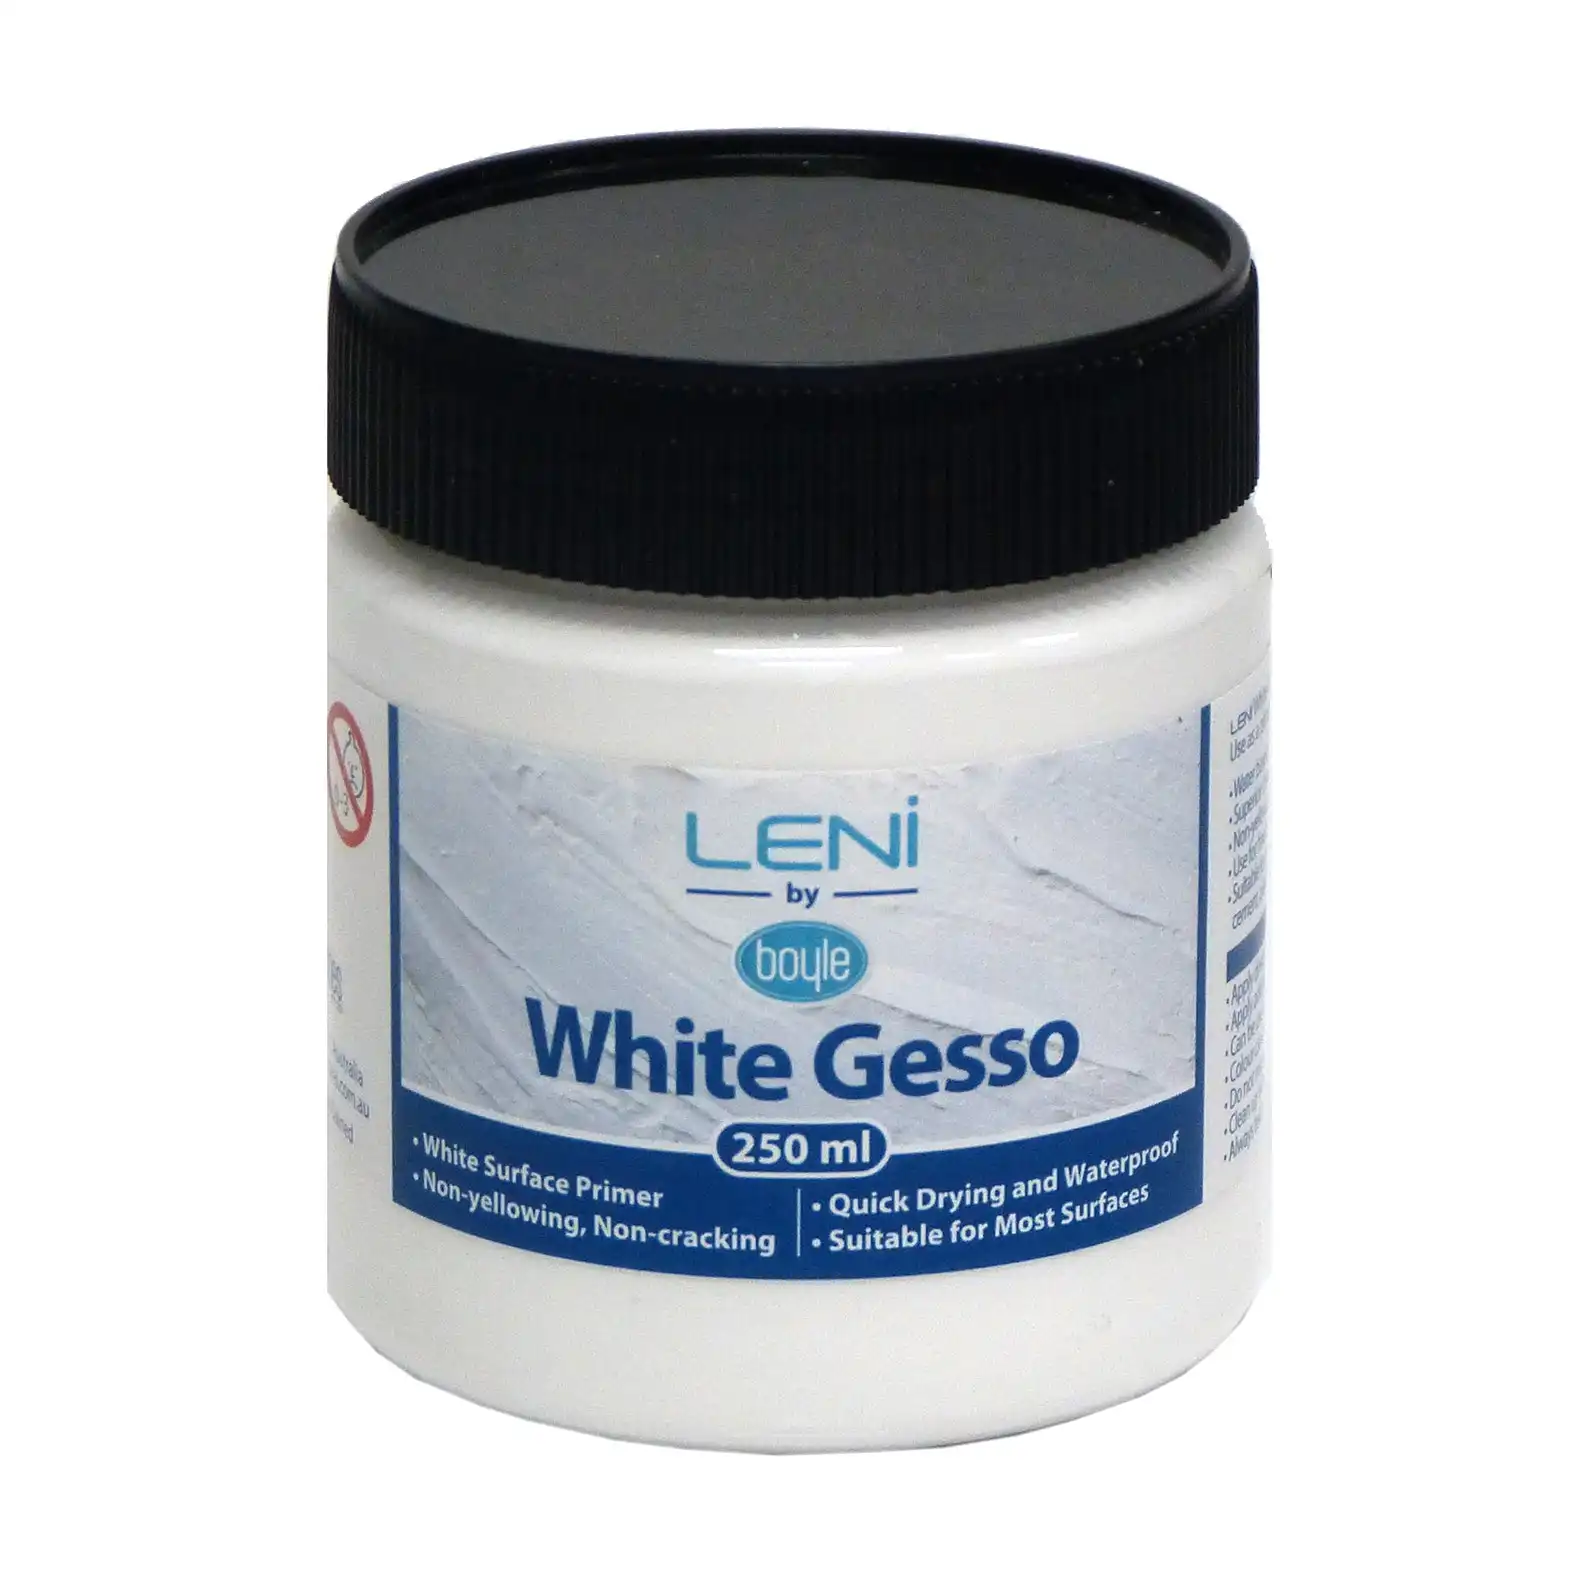 Boyle Leni Non-Toxic Quick Drying Waterproof White Gesso 250ml Surface Primer